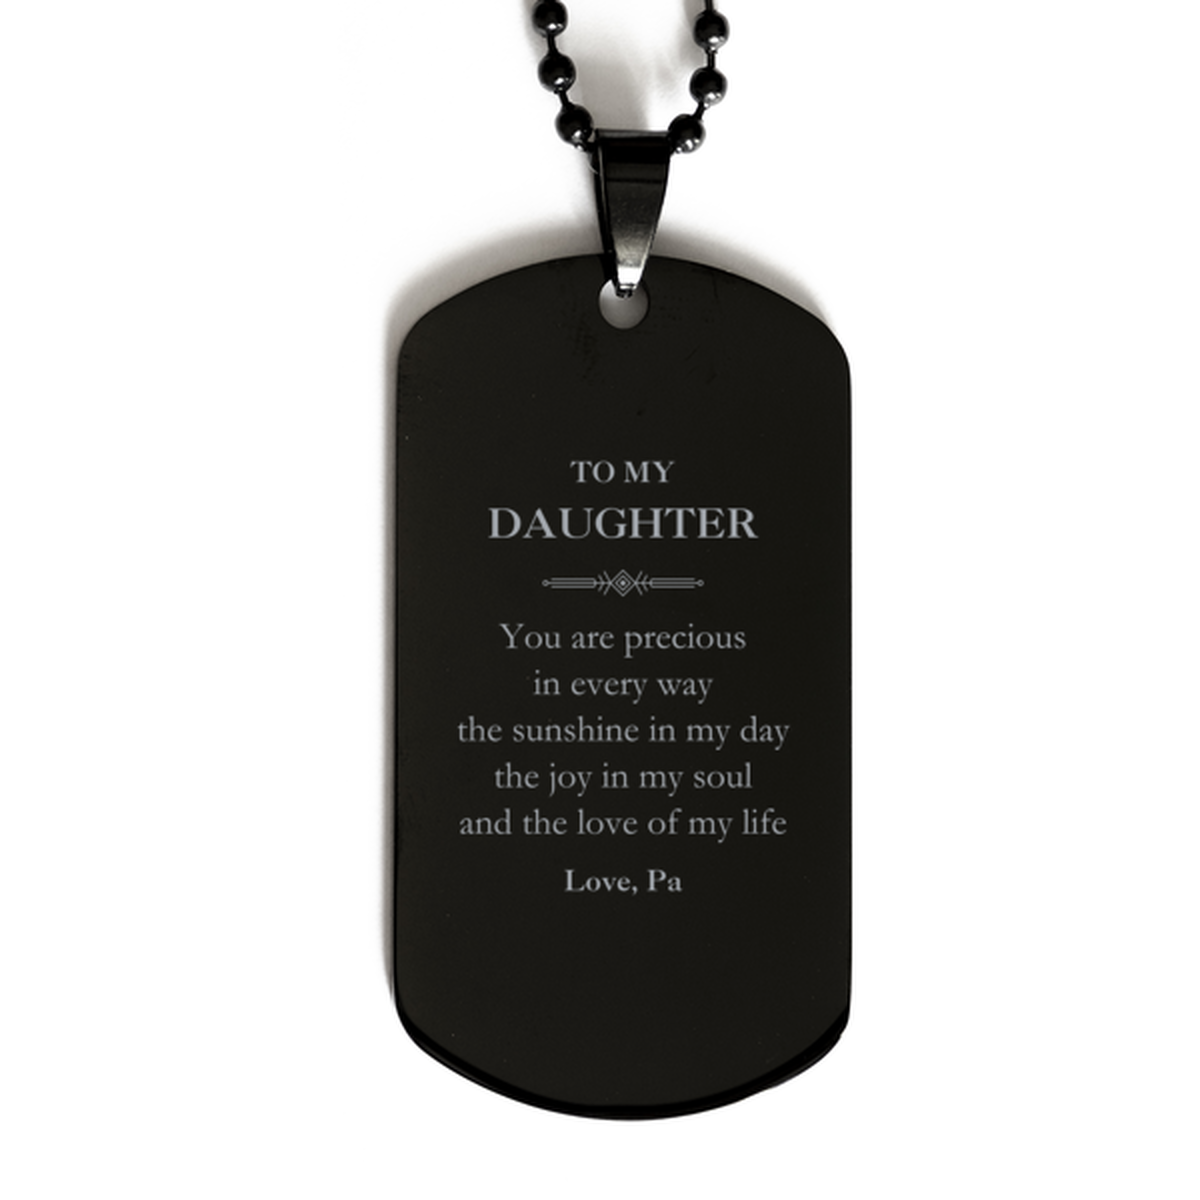 Graduation Gifts for Daughter Black Dog Tag Present from Pa, Christmas Daughter Birthday Gifts Daughter You are precious in every way the sunshine in my day. Love, Pa